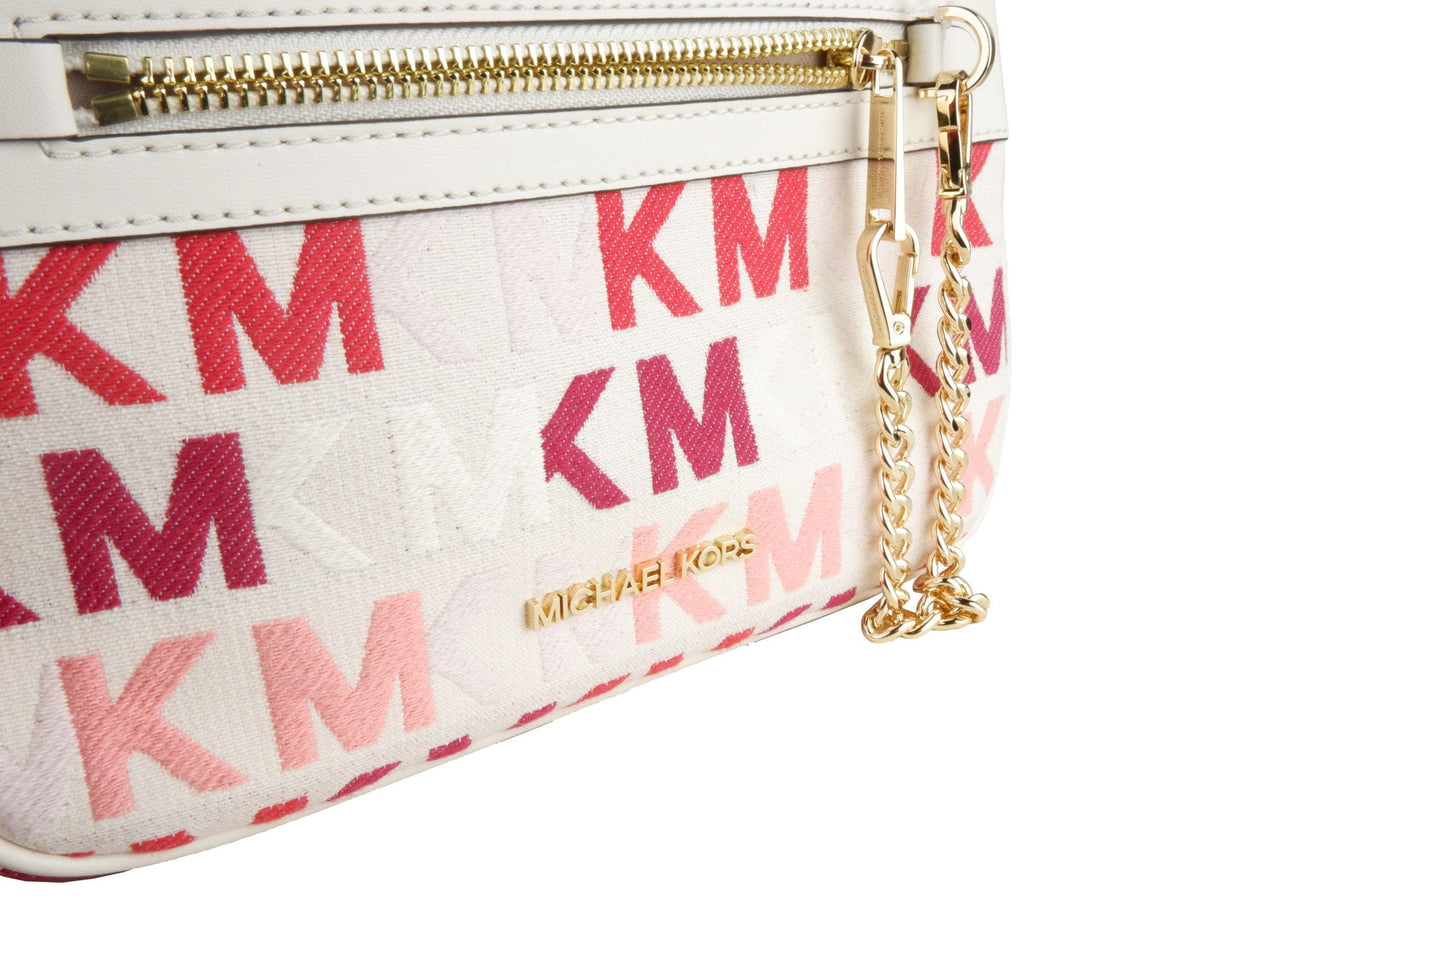 Chic White Crossbody Bag with Pink & Red Accents